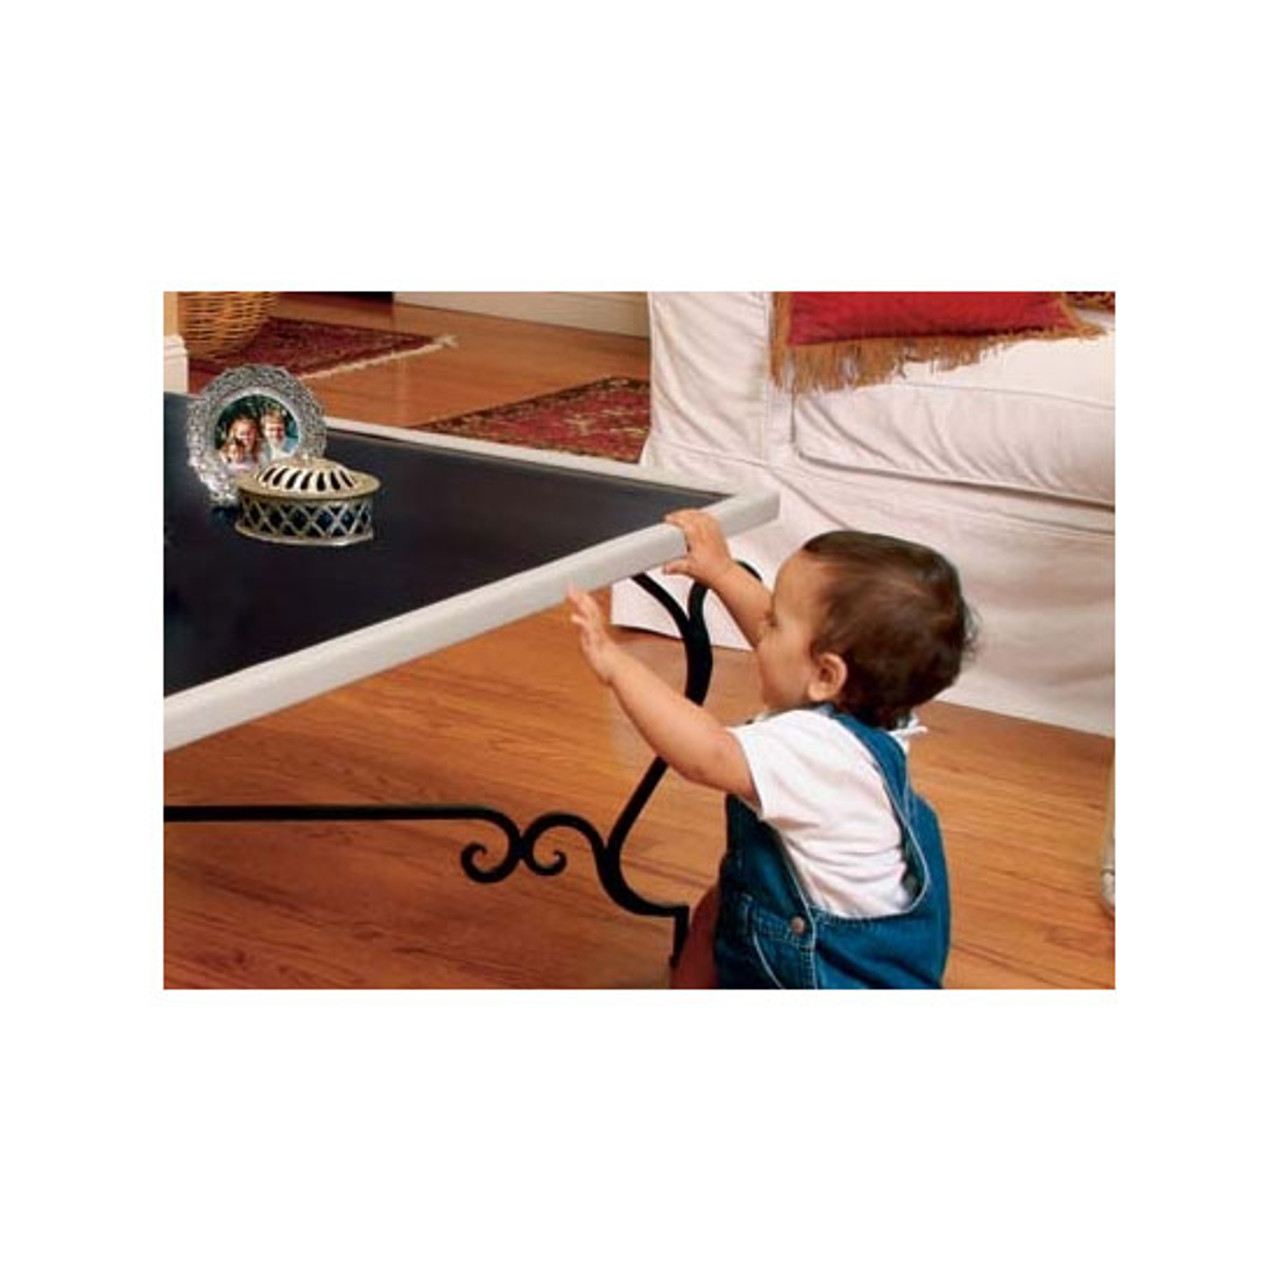 Table Edge Guards - Protect Your Child from Sharp Edges - Prince